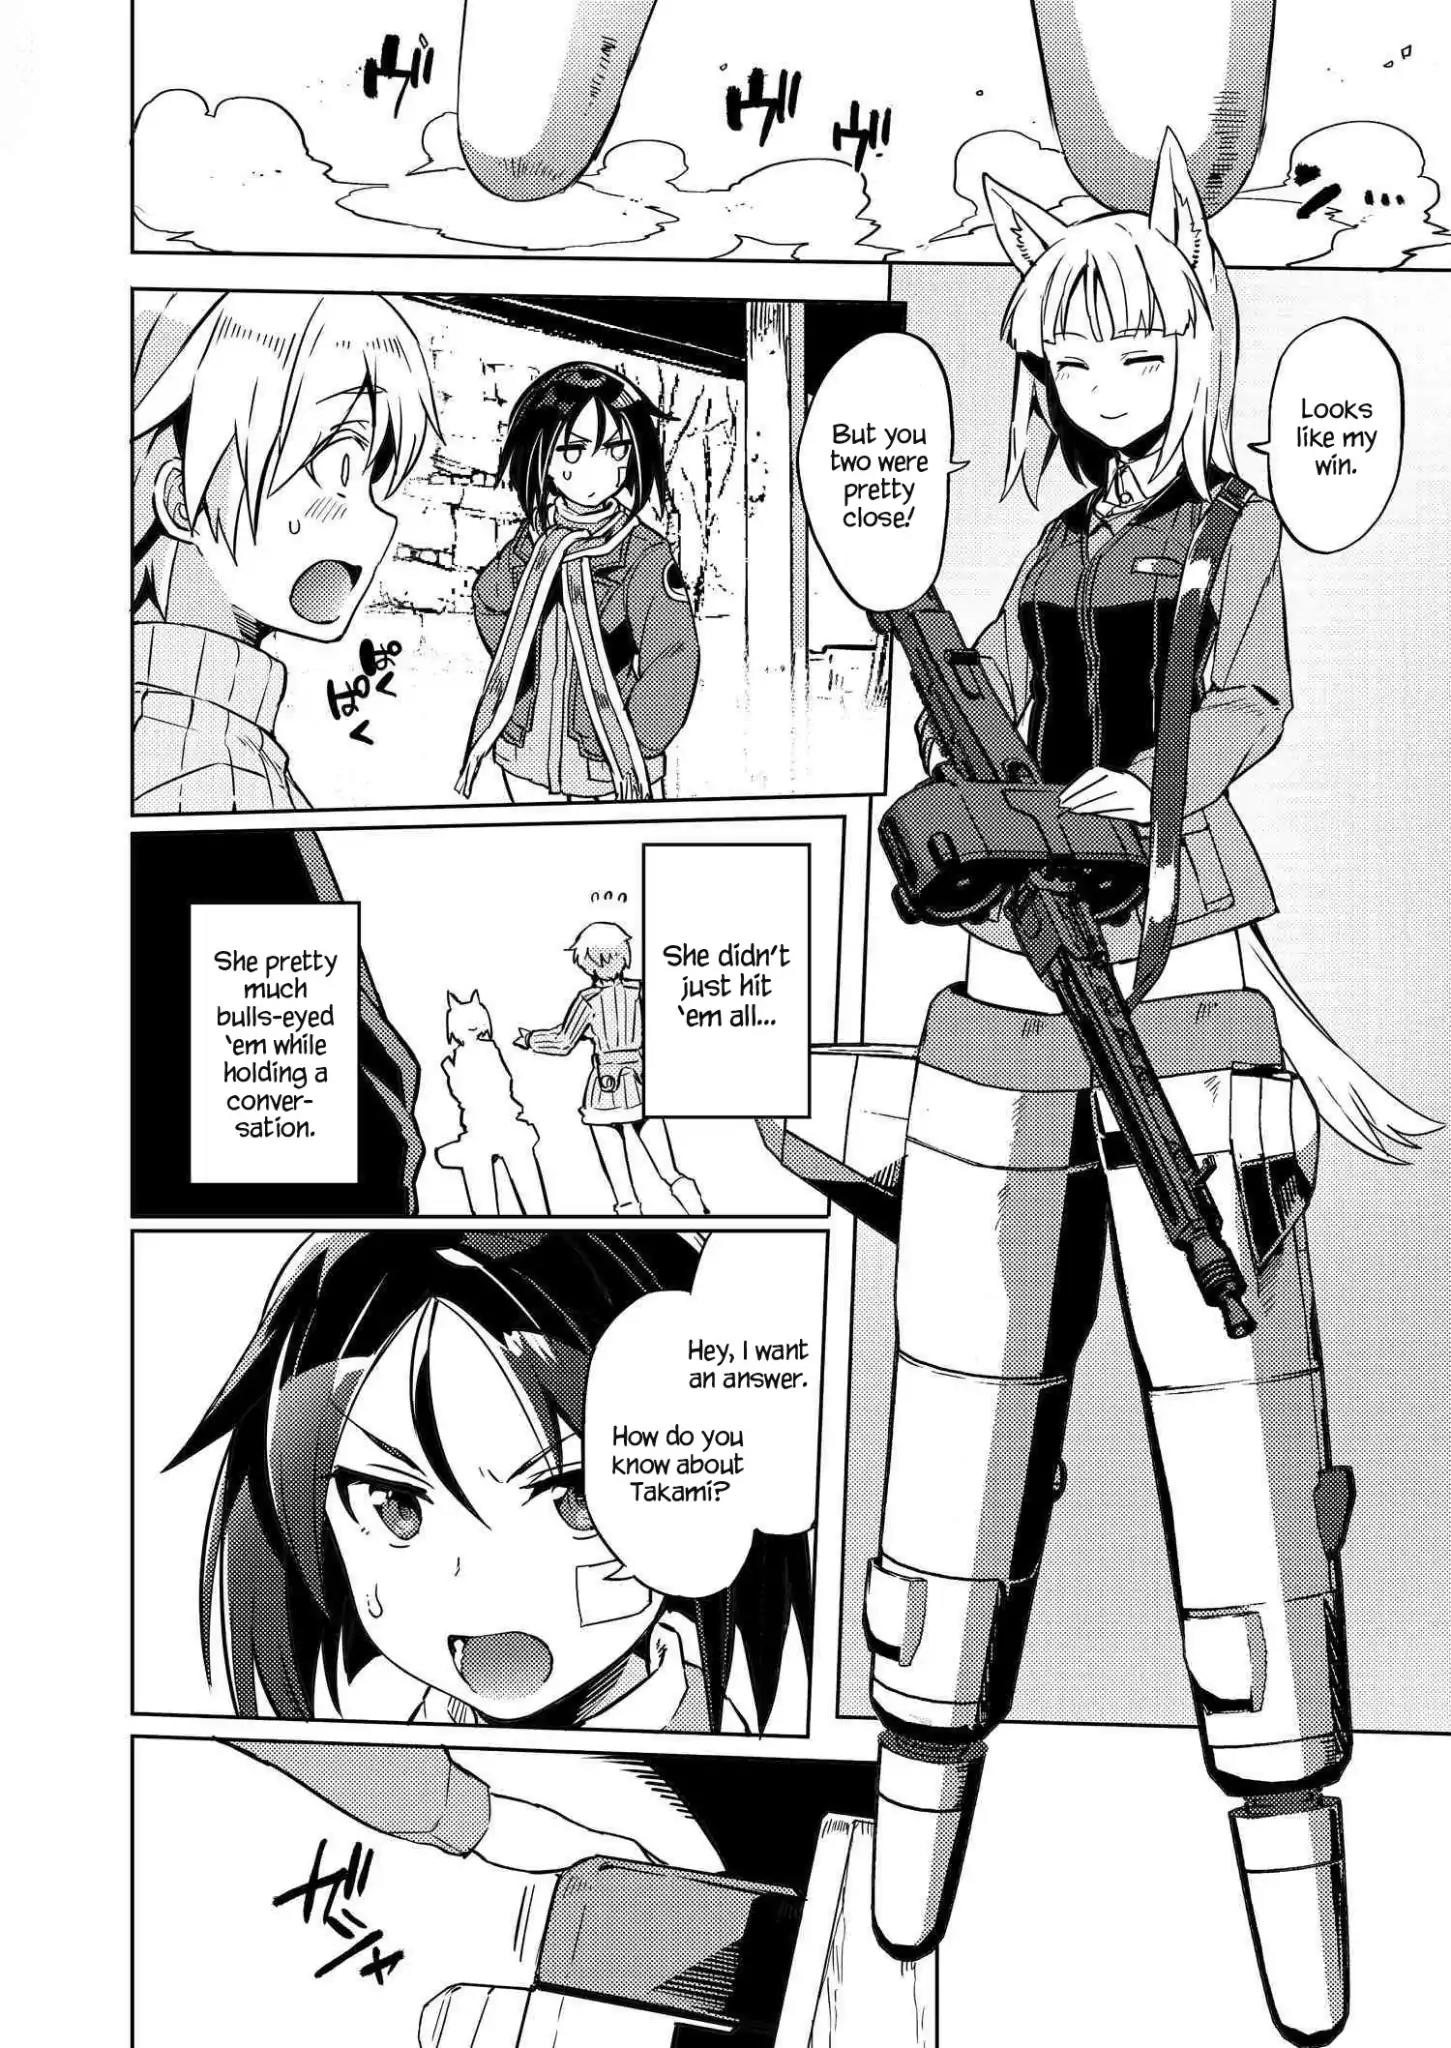 Brave Witches Prequel Chapter 6